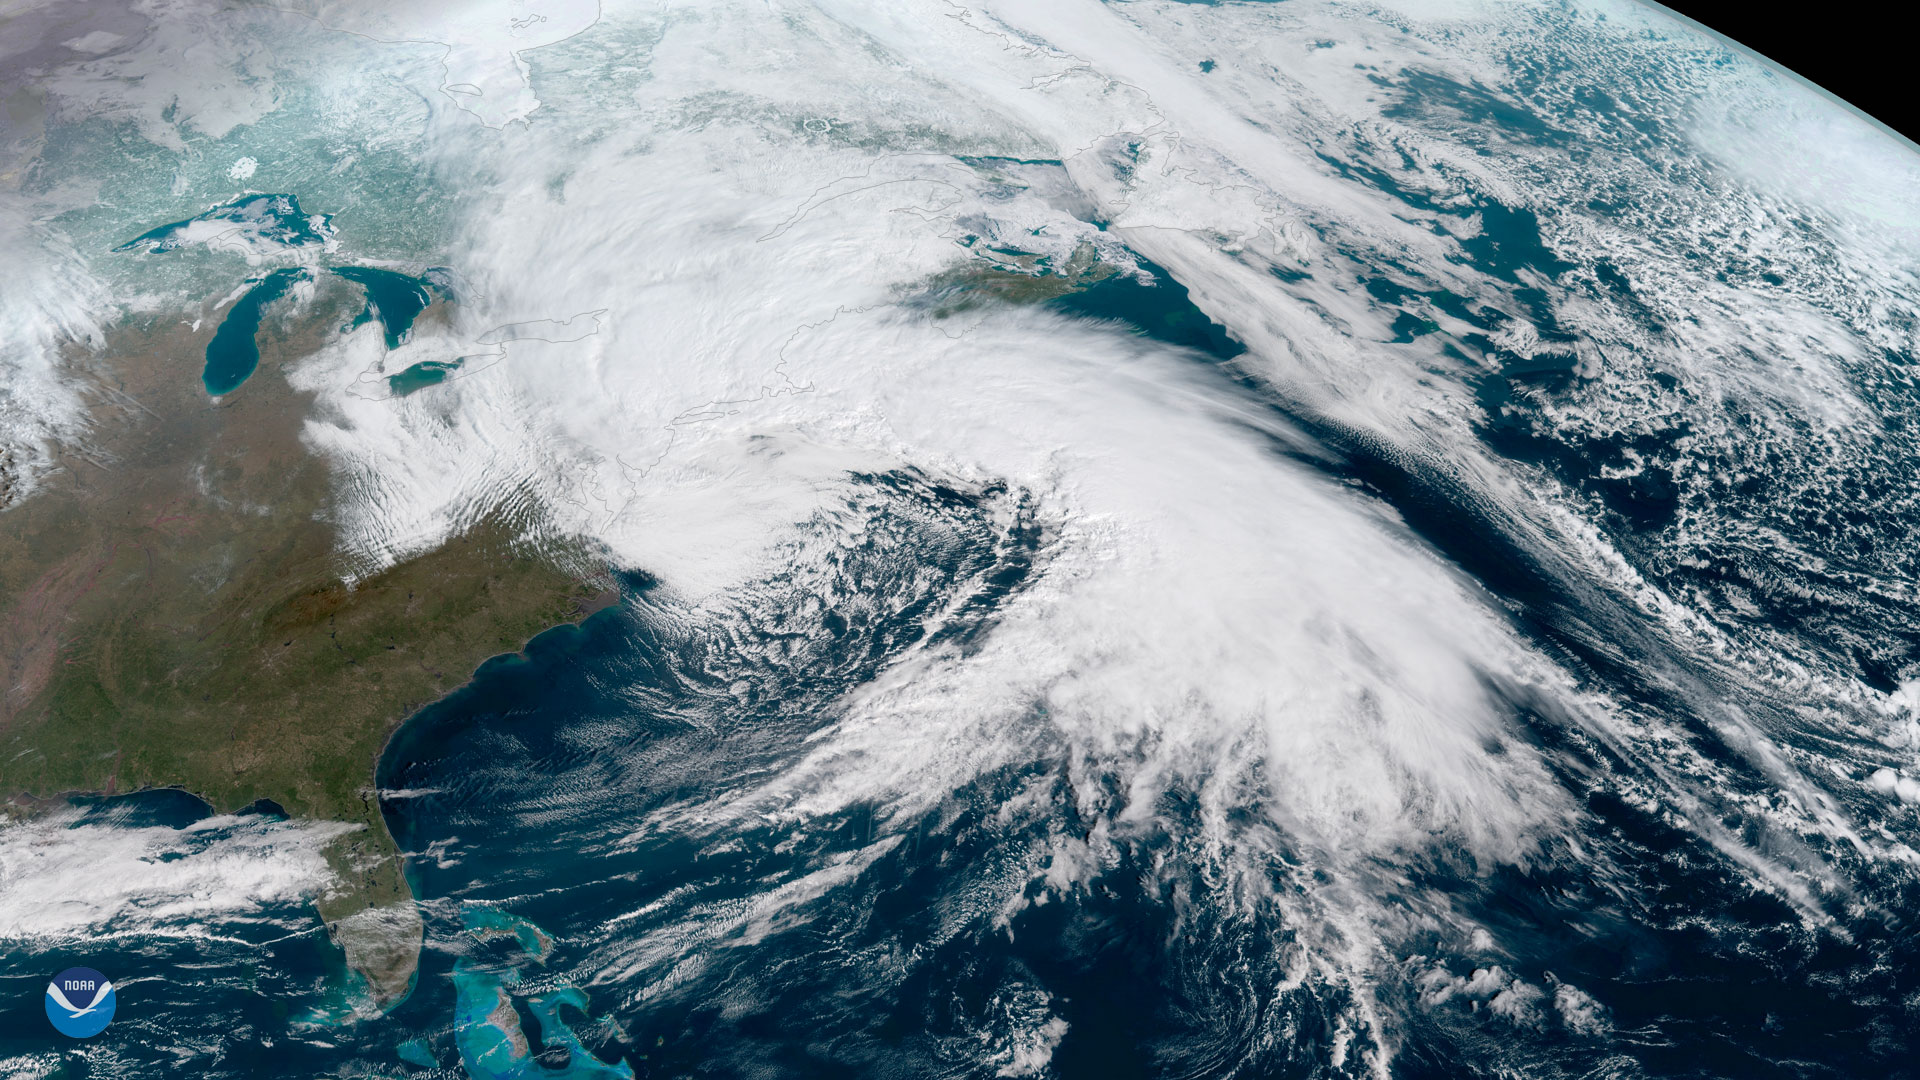 Satellite image of the eastern United States showing a Nor'easter over the northeast on March 2, 2018. The image shows a large, white cloud over the northeastern United States and extending both northward and eastward into the Atlantic Ocean.